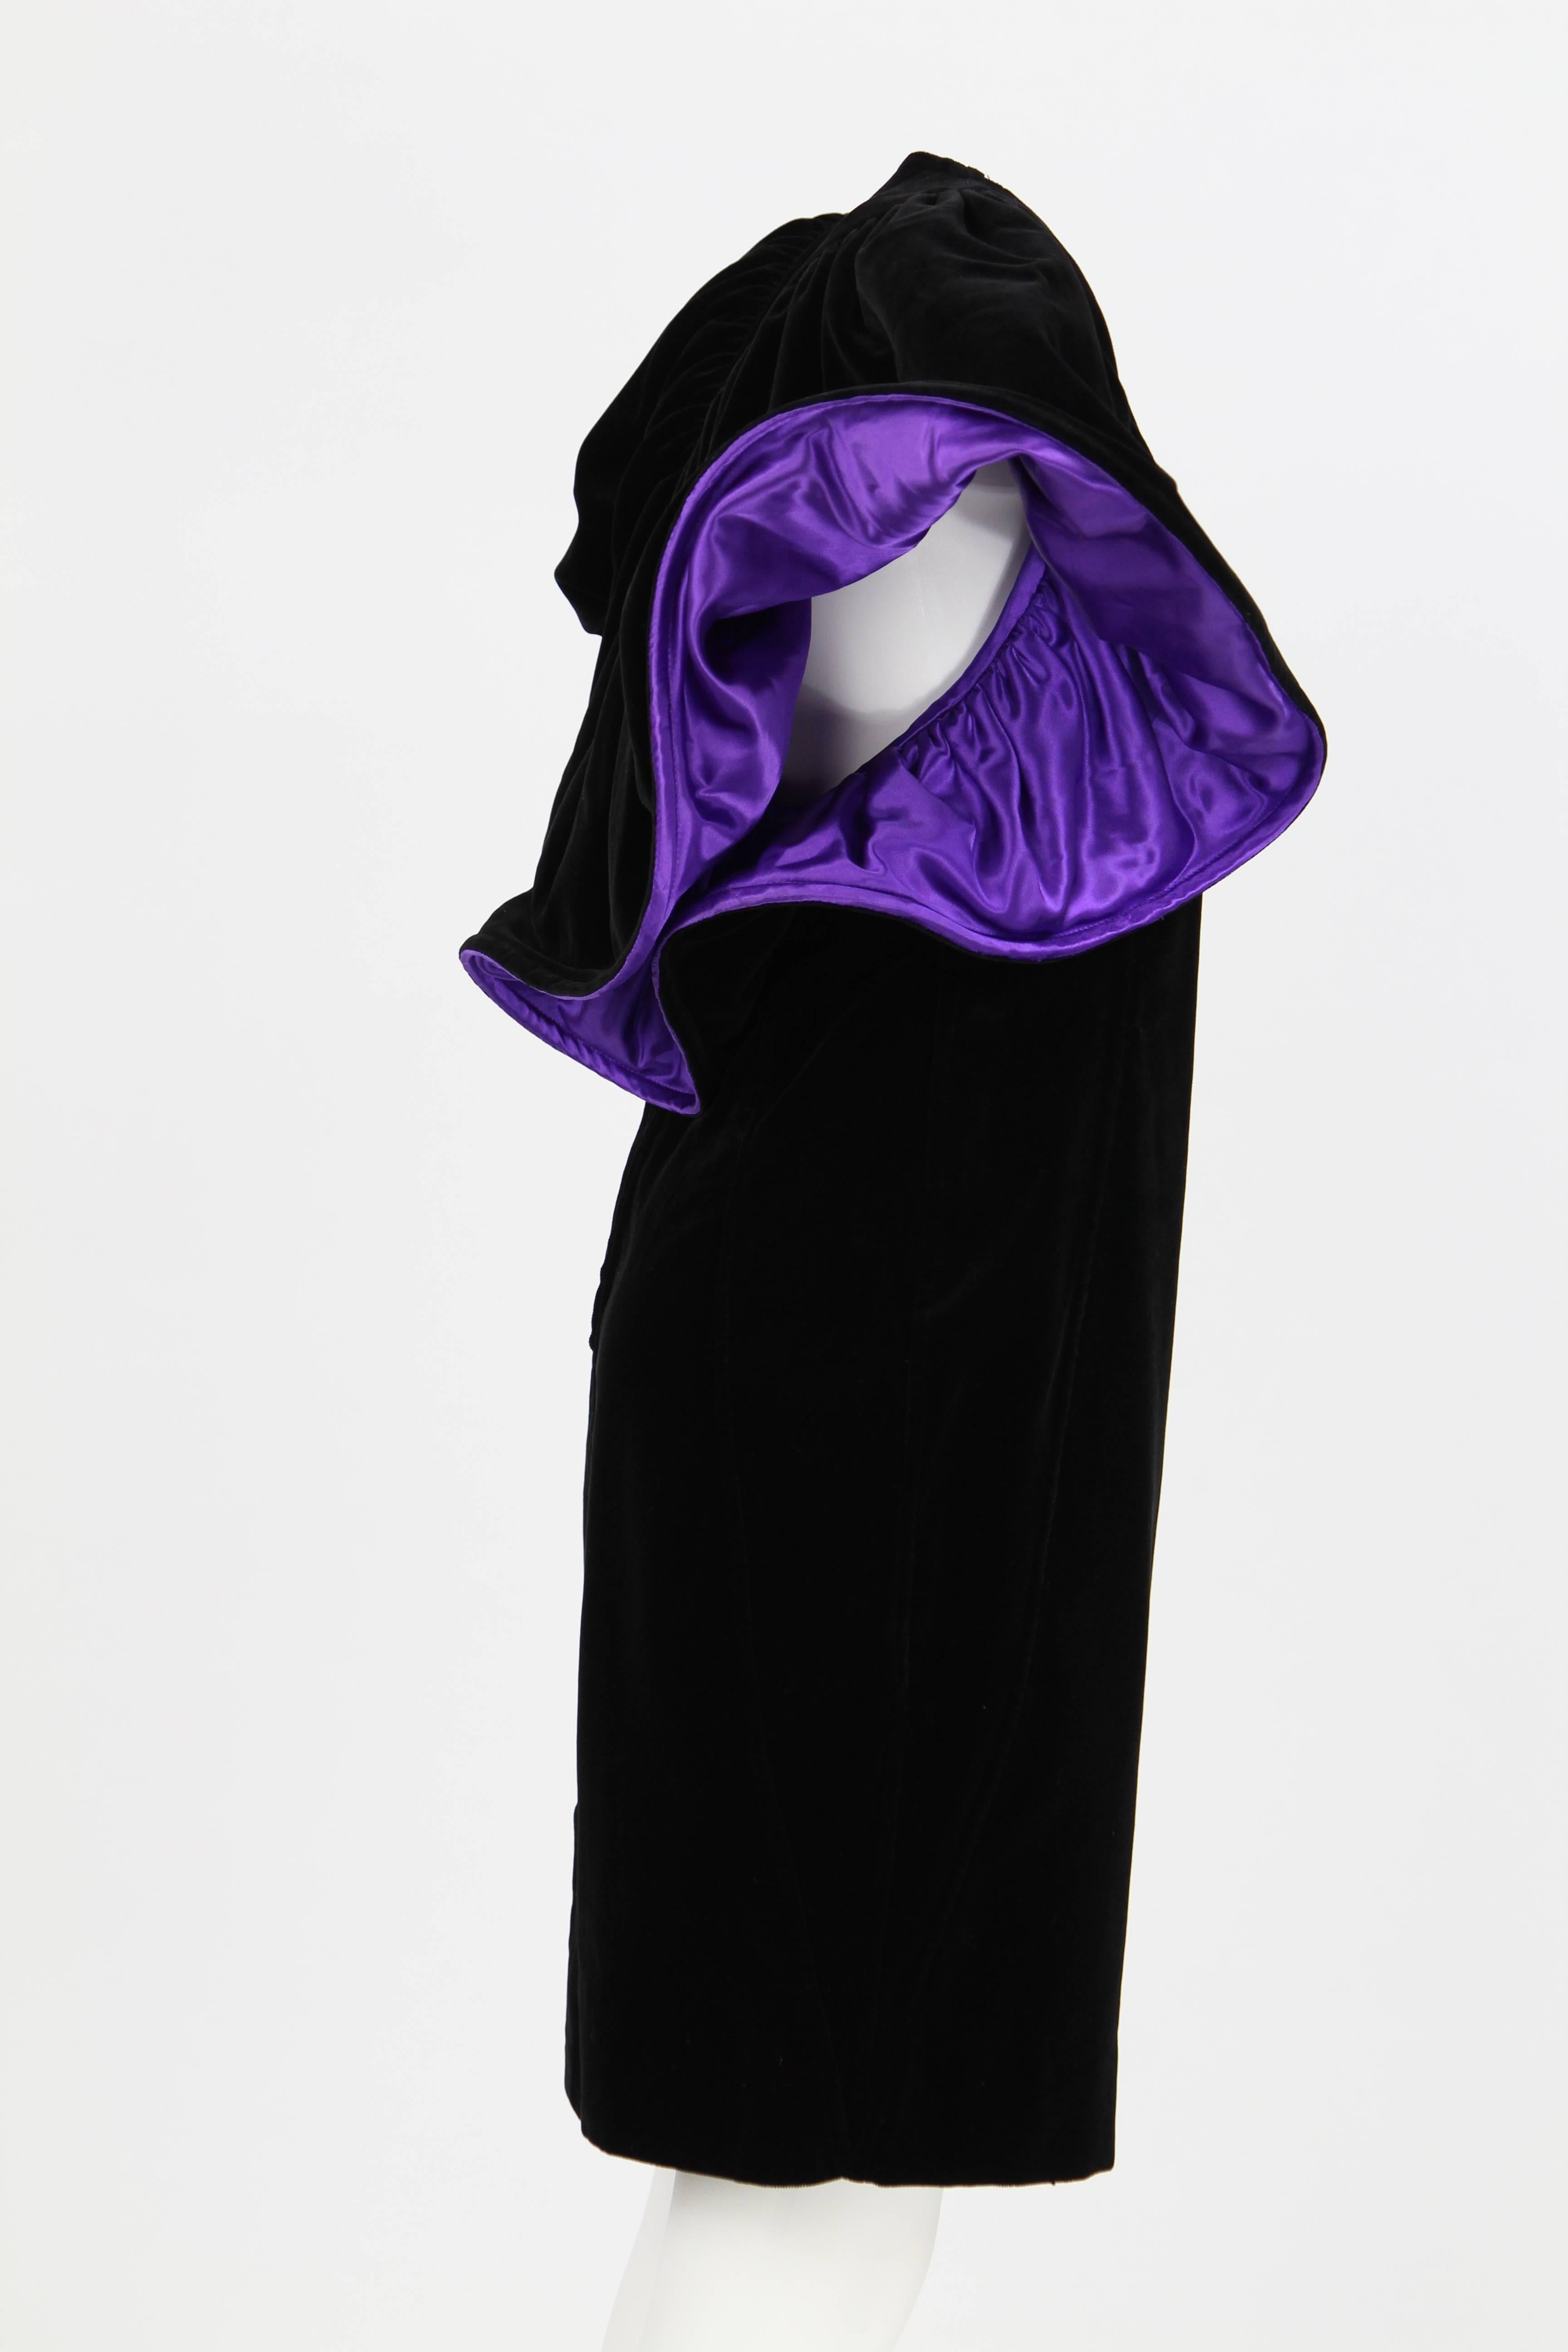 Lovely Popy Moreni black and purple cotton-blend velvet Mini Dress featuring wide short sleeves, with a purple lining. 
This dress has a capturing 1980's allure and is in great conditions.
The size is 38 FR.